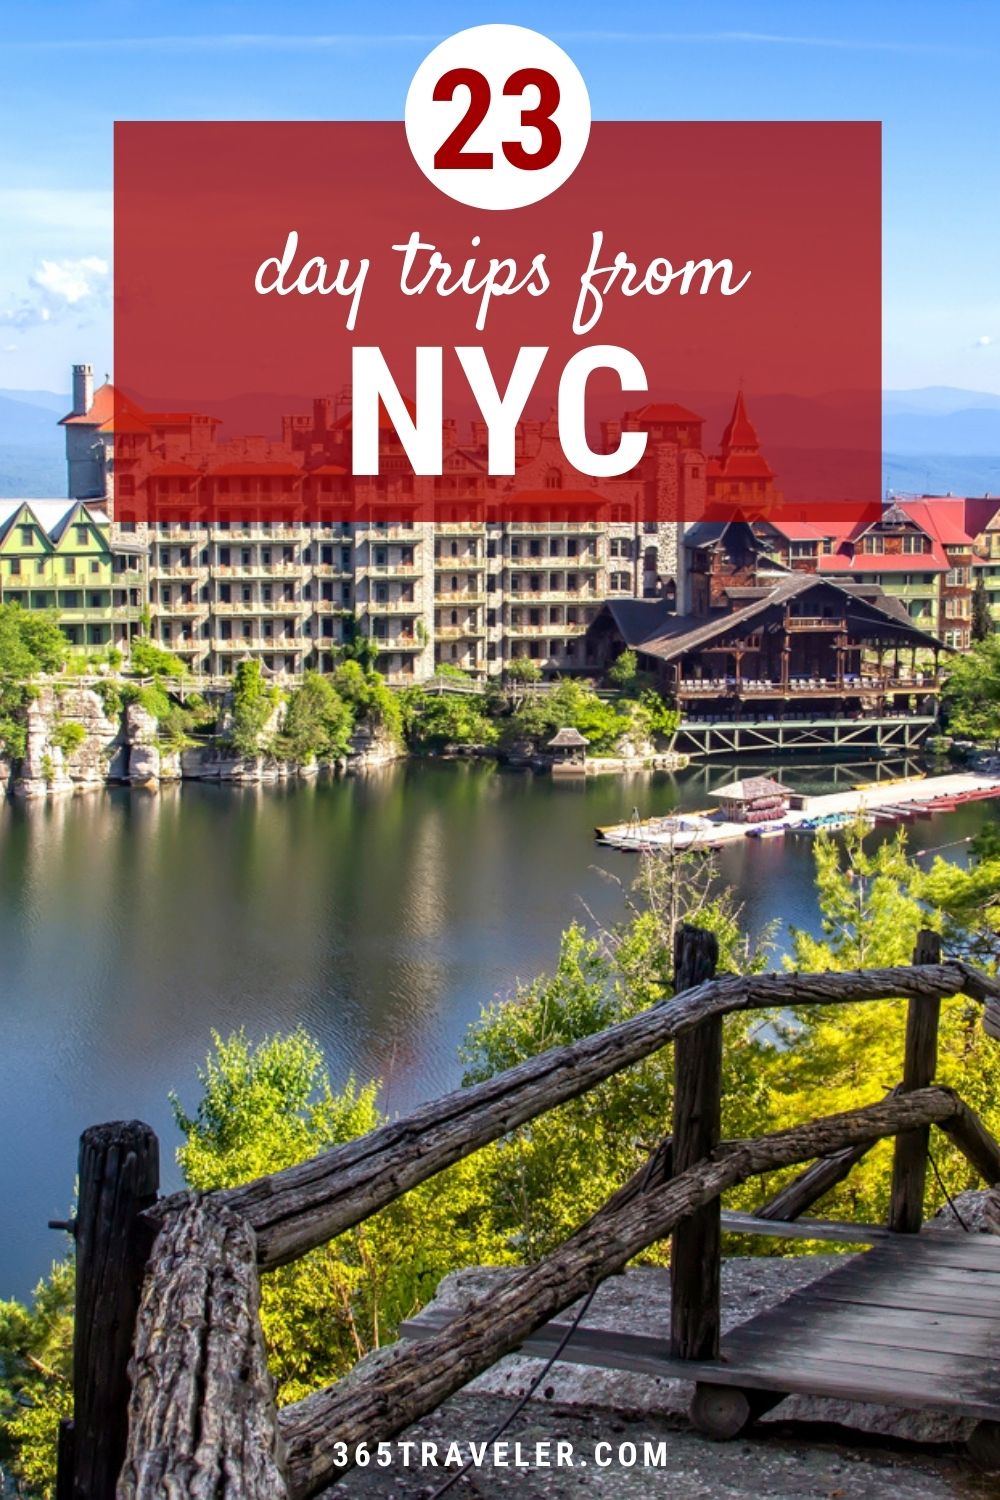 23 DAY TRIPS FROM NYC YOU'VE GOT TO EXPERIENCE